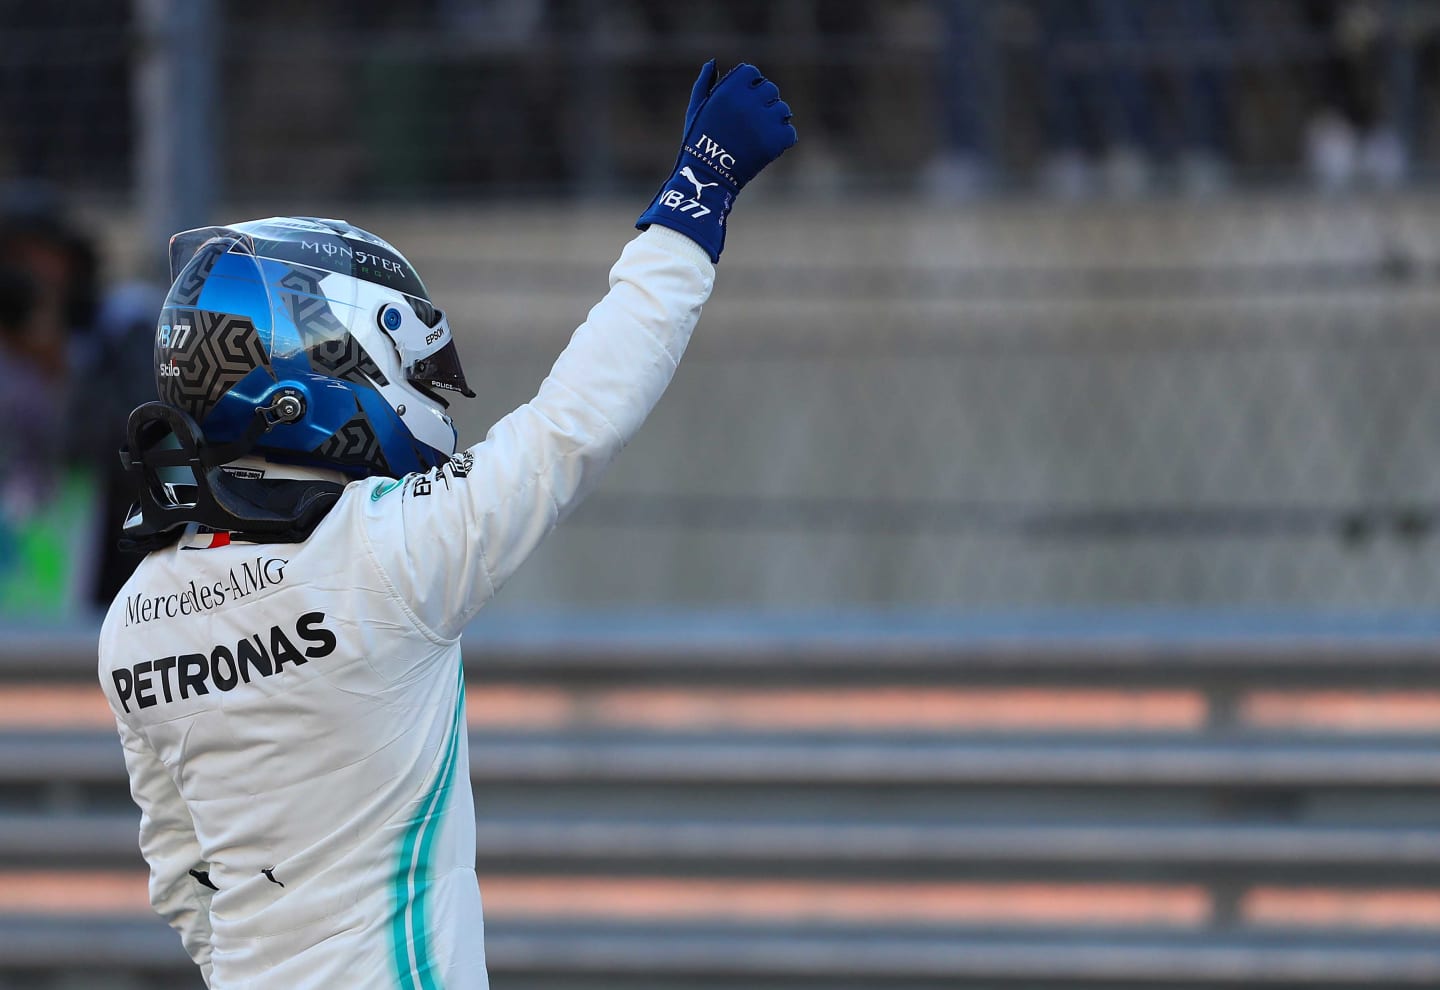 AUSTIN, TEXAS - NOVEMBER 02: Pole position qualifier Valtteri Bottas of Finland and Mercedes GP celebrates in parc ferme during qualifying for the F1 Grand Prix of USA at Circuit of The Americas on November 02, 2019 in Austin, Texas. (Photo by Mark Thompson/Getty Images)